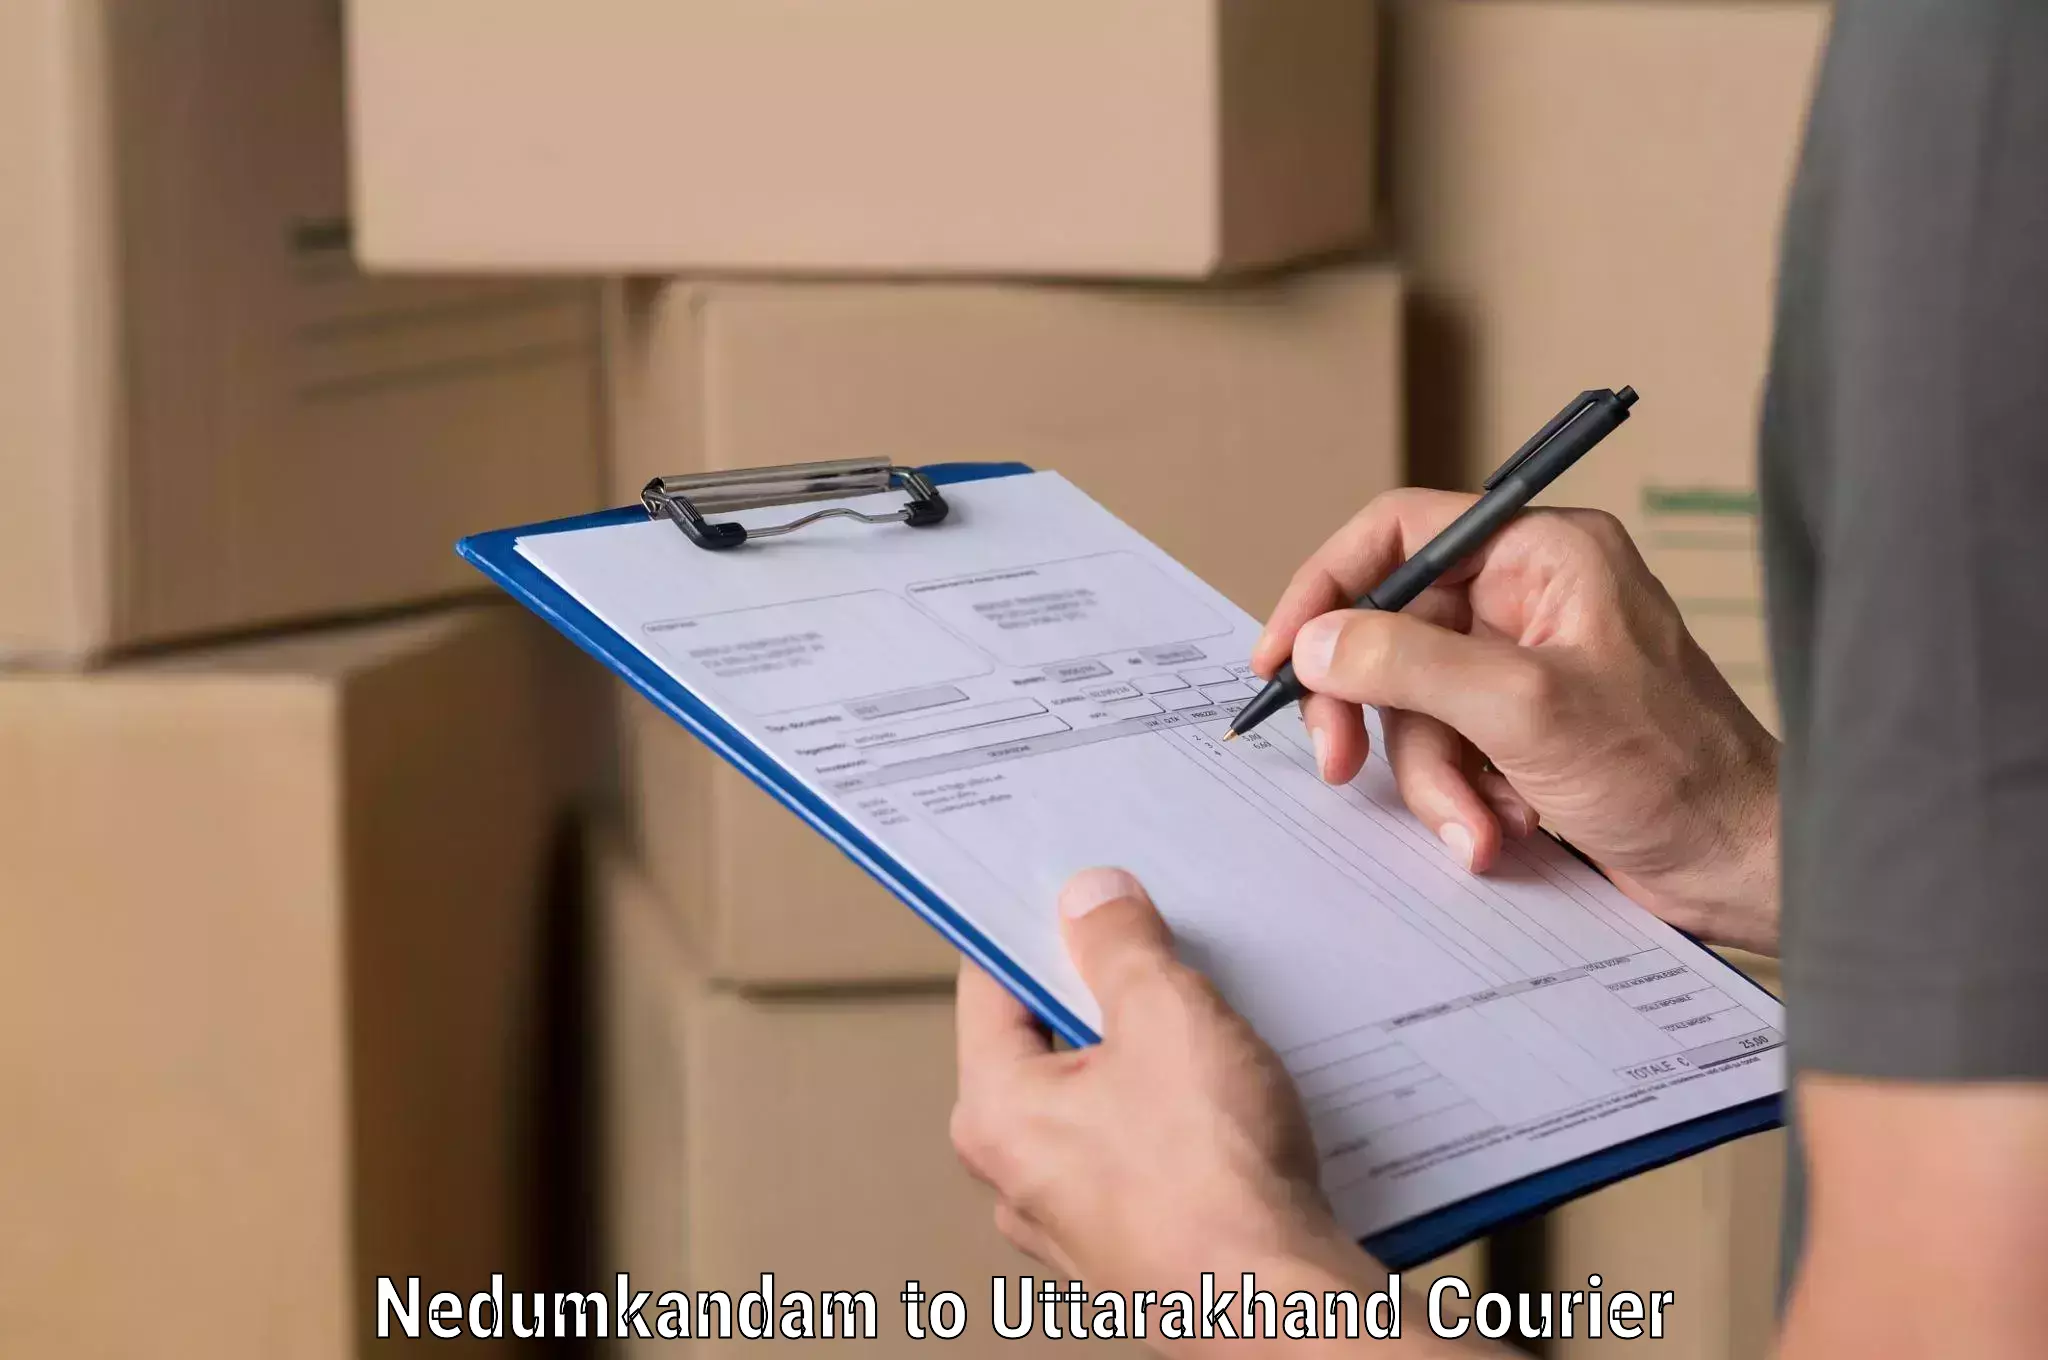 Automated parcel services Nedumkandam to Mussoorie